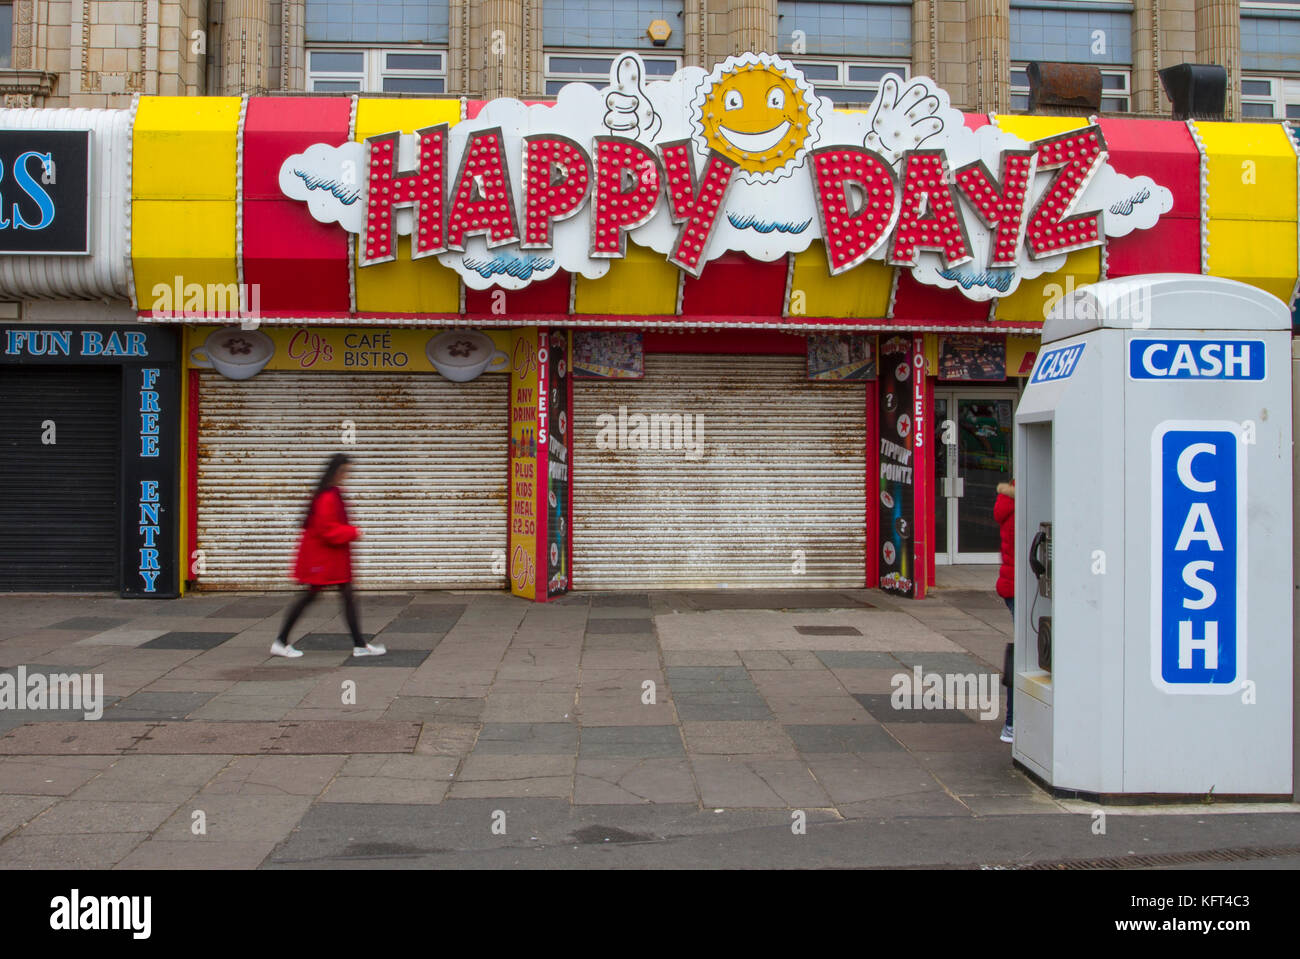 'Happy Days' sign; Out of focus figures passing Golden Mile Retail units To Let, Closed, Closing down, Shuttered shops, businesses in decline, with poor retail sales.   The Malaise affecting British Seaside resorts. Blackpool, Lancashire, UK Stock Photo